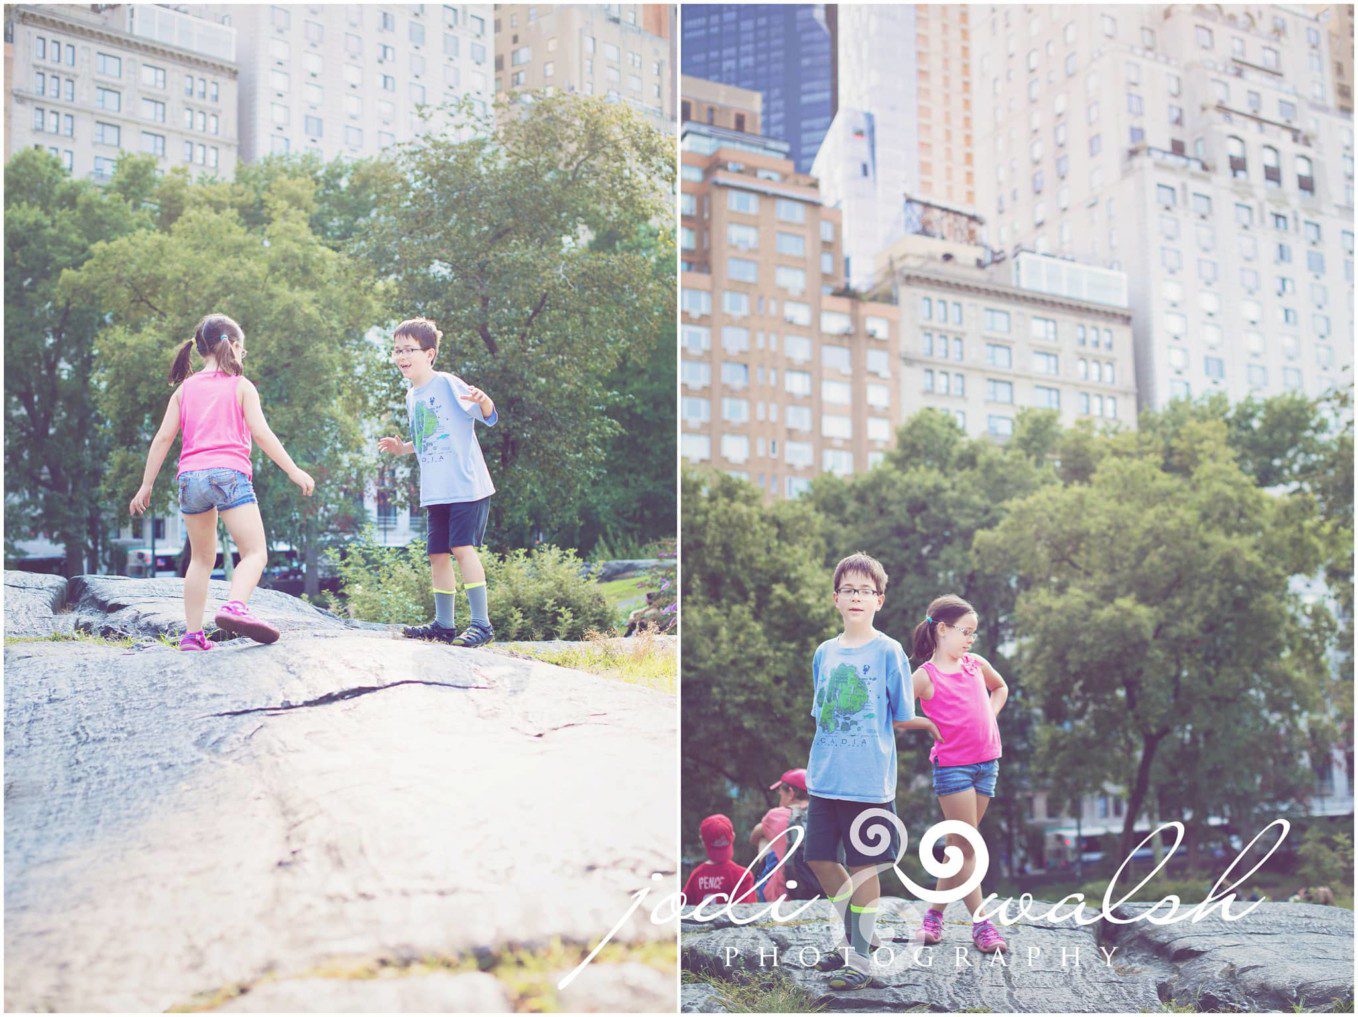 little girl and boy playing the the large rocks in Central Park, NYC. Tall buildings are in the distance behind them.